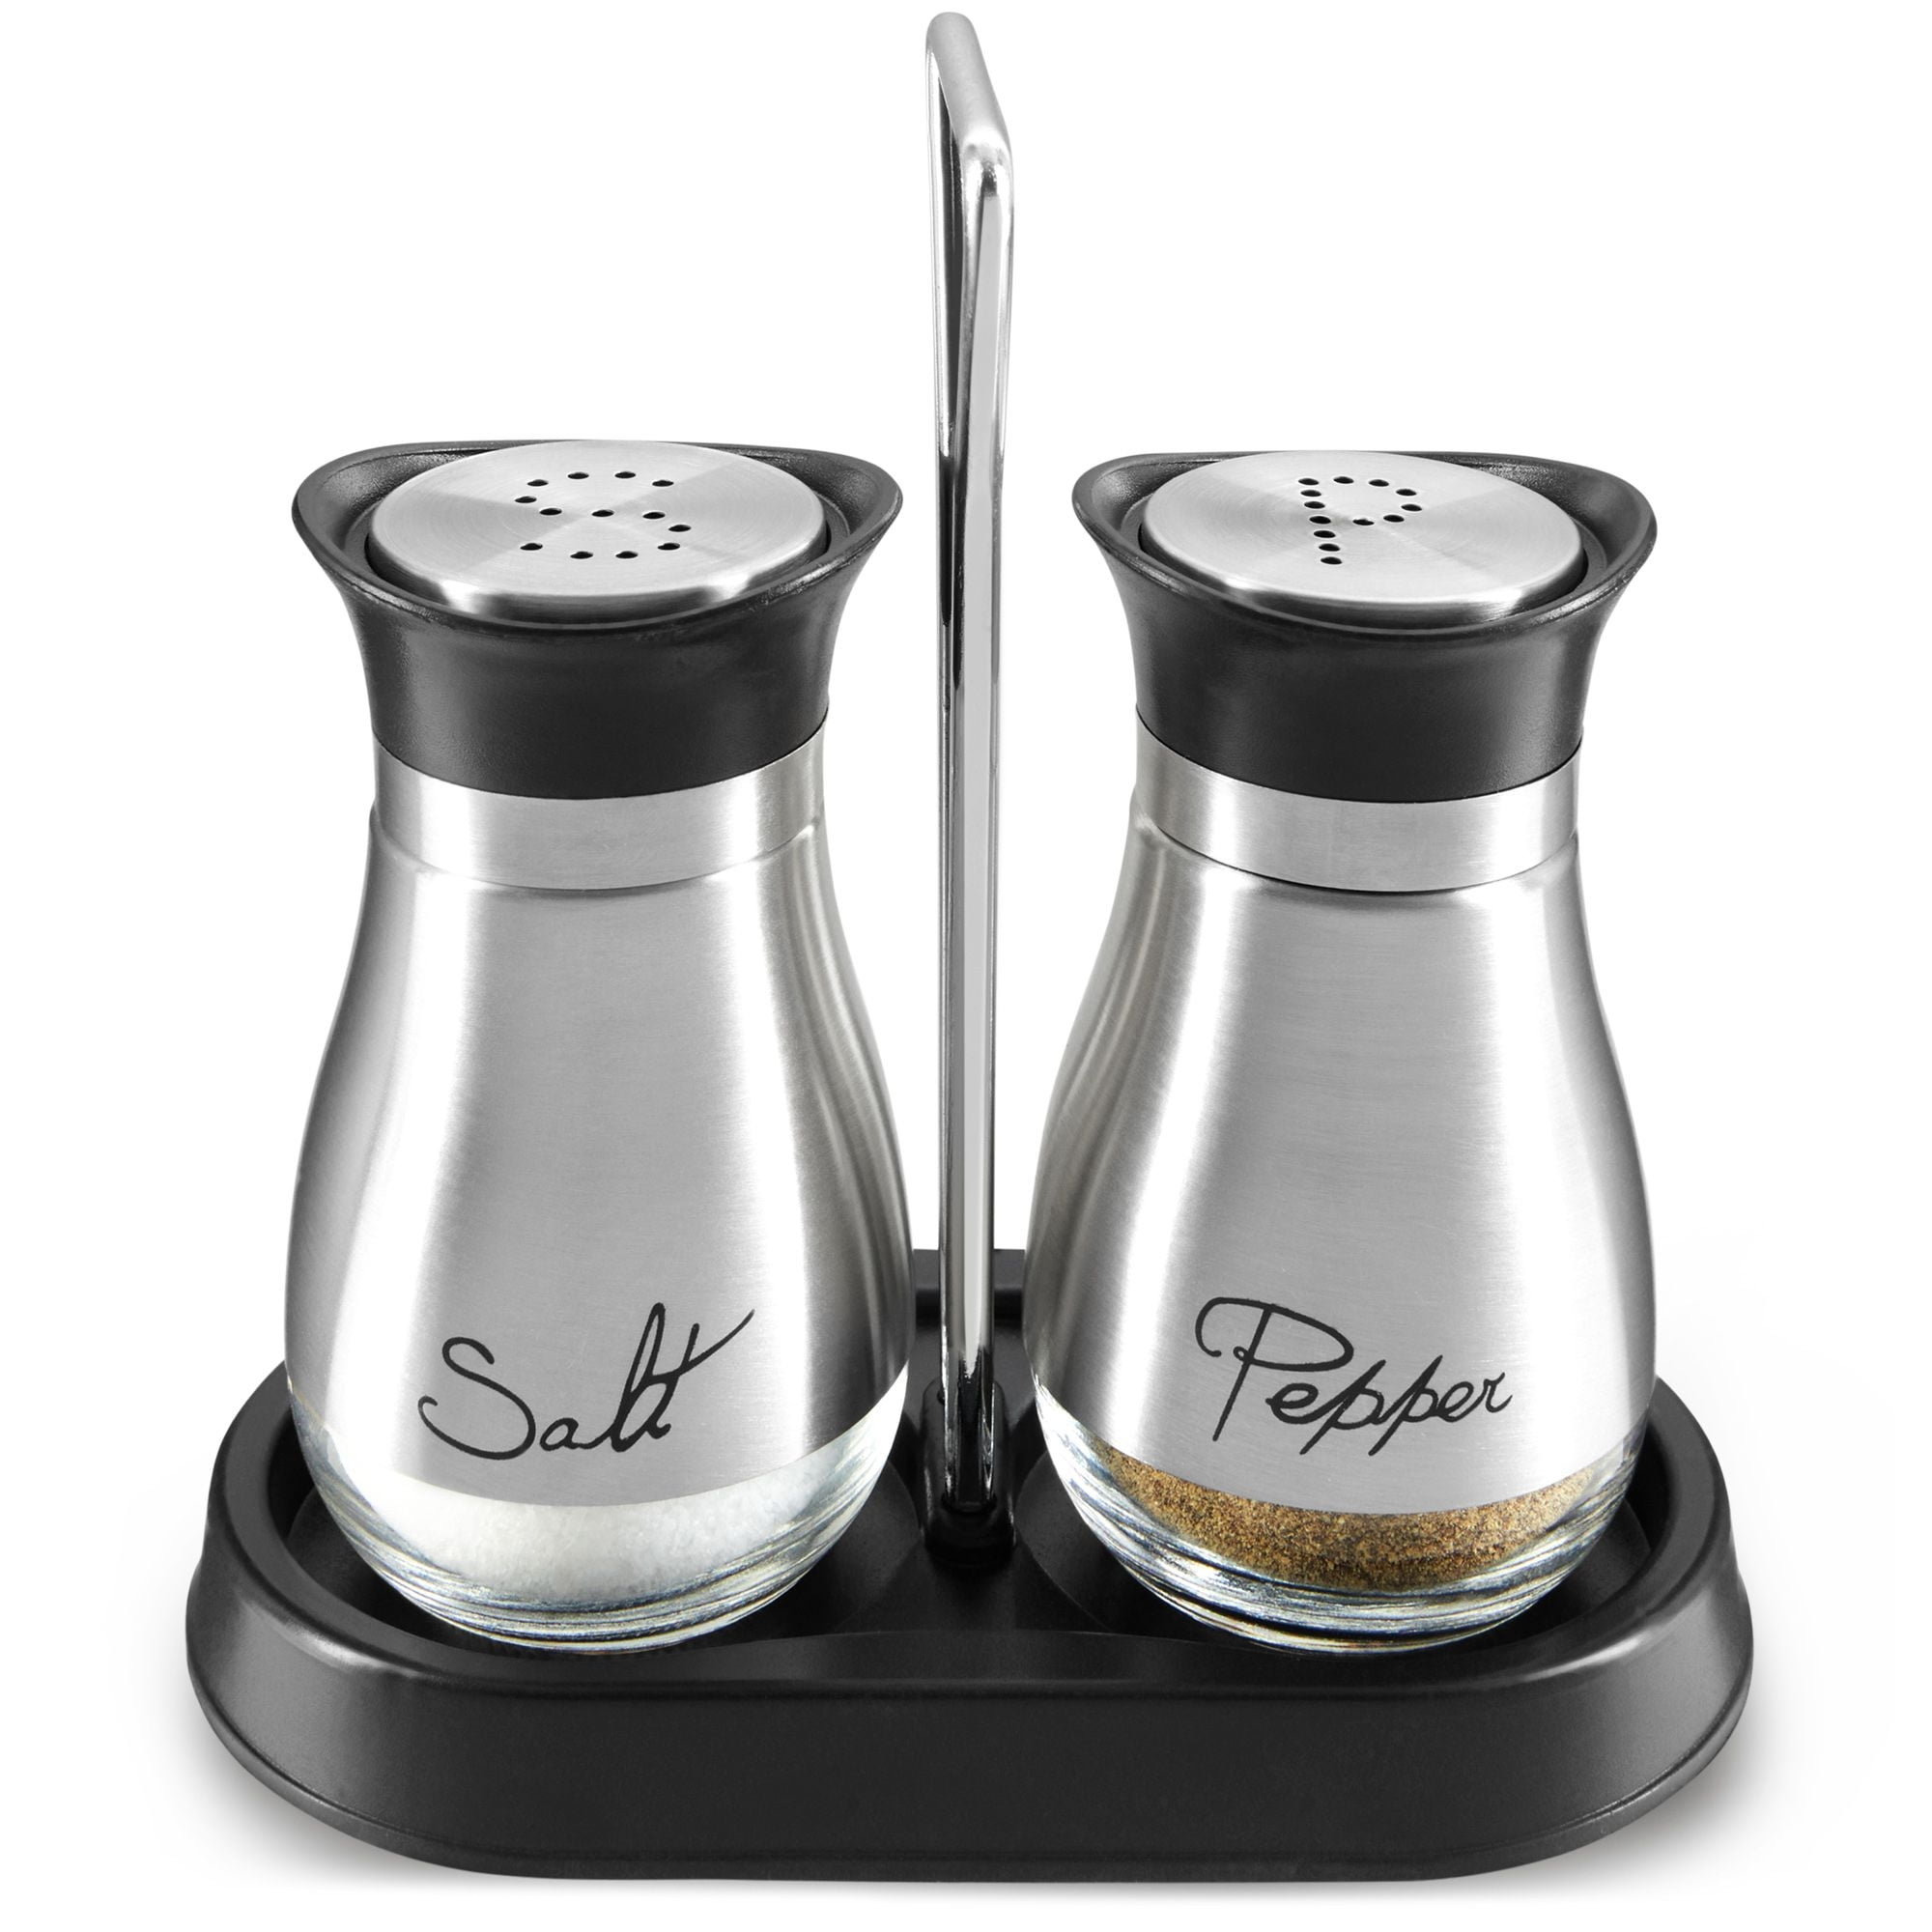  HINITOYOU Wood Salt and Pepper Shakers Refillable